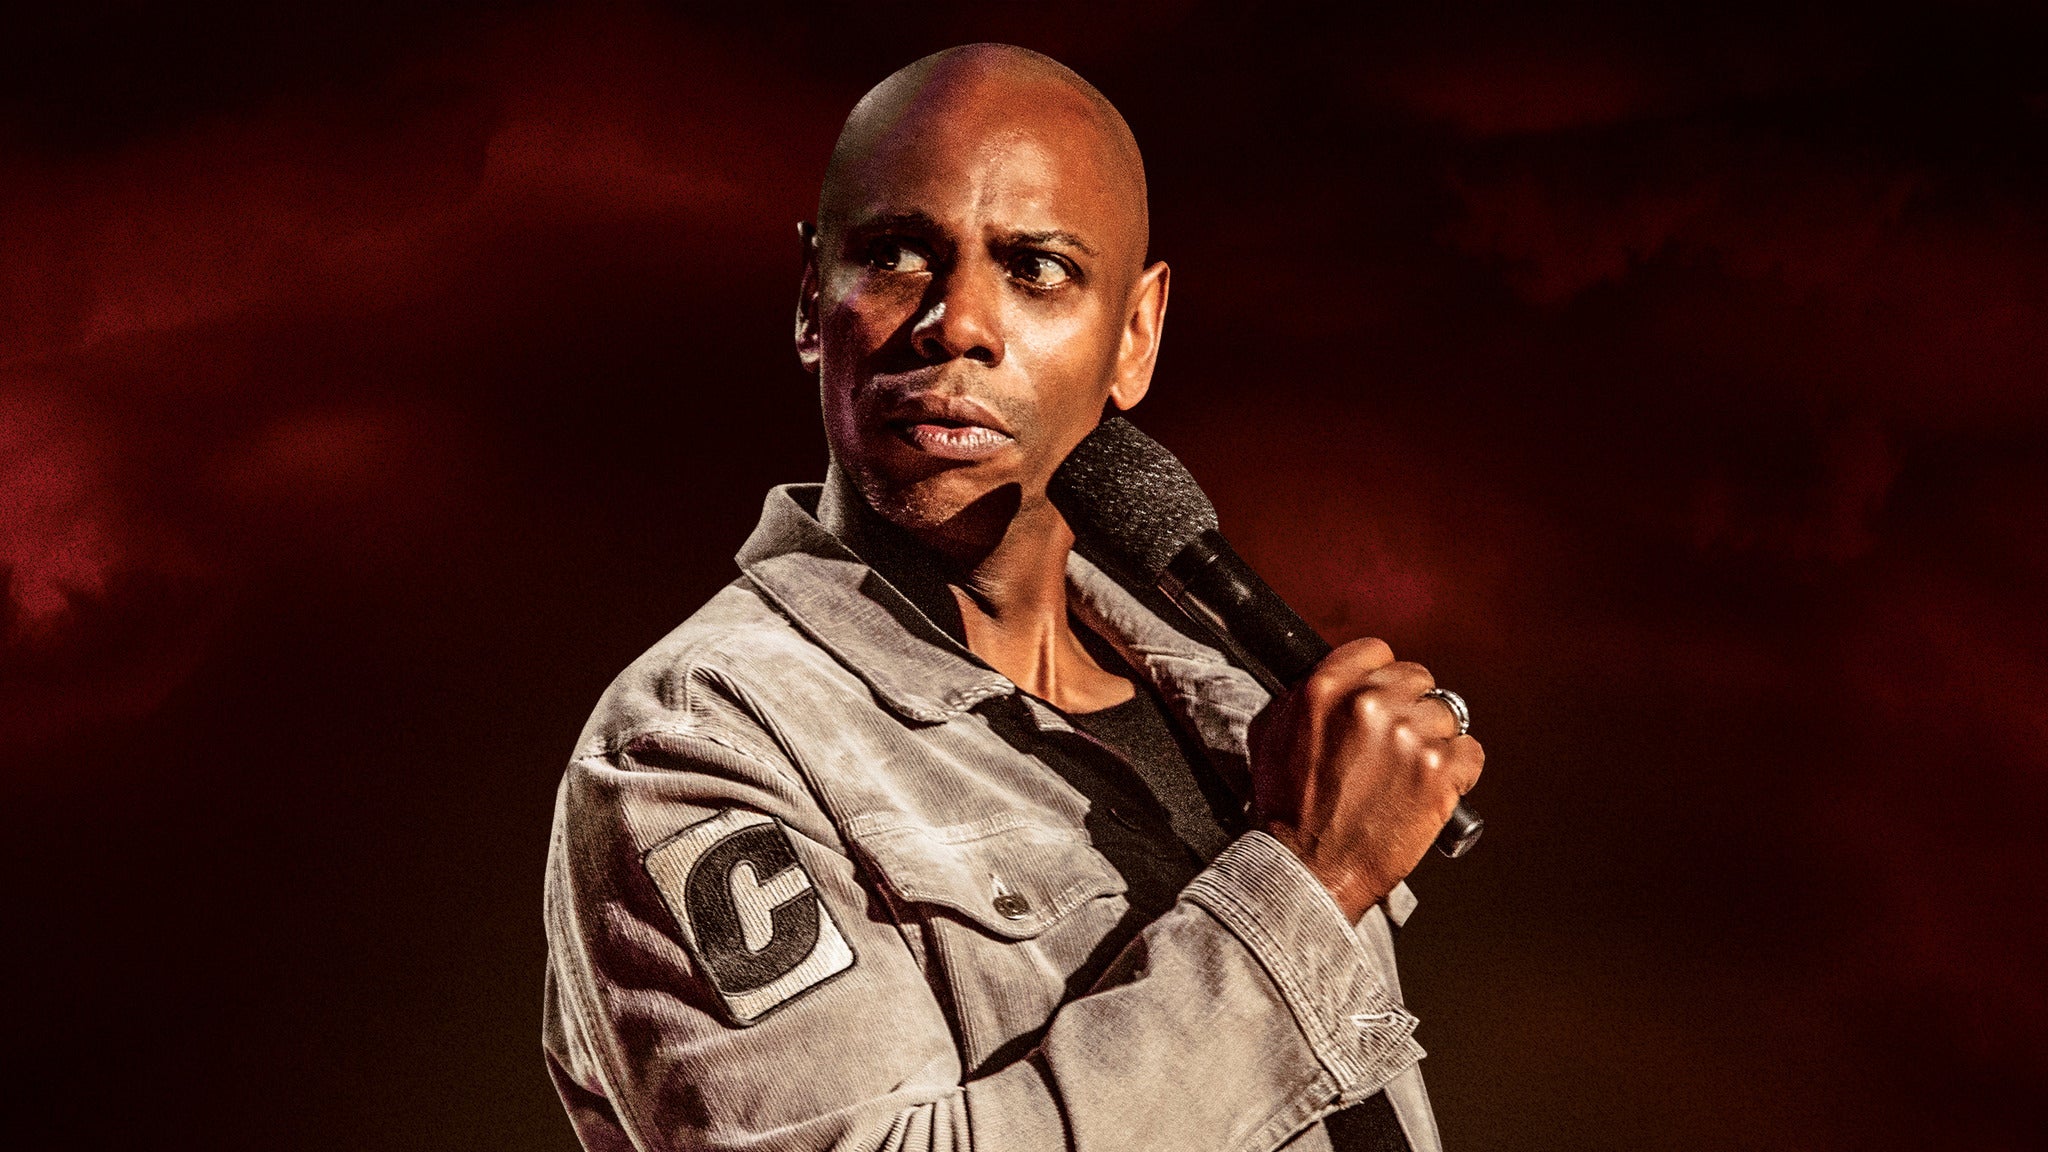 "Untitled" Dave Chappelle Documentary in Hollywood promo photo for American Express® Card Member presale offer code